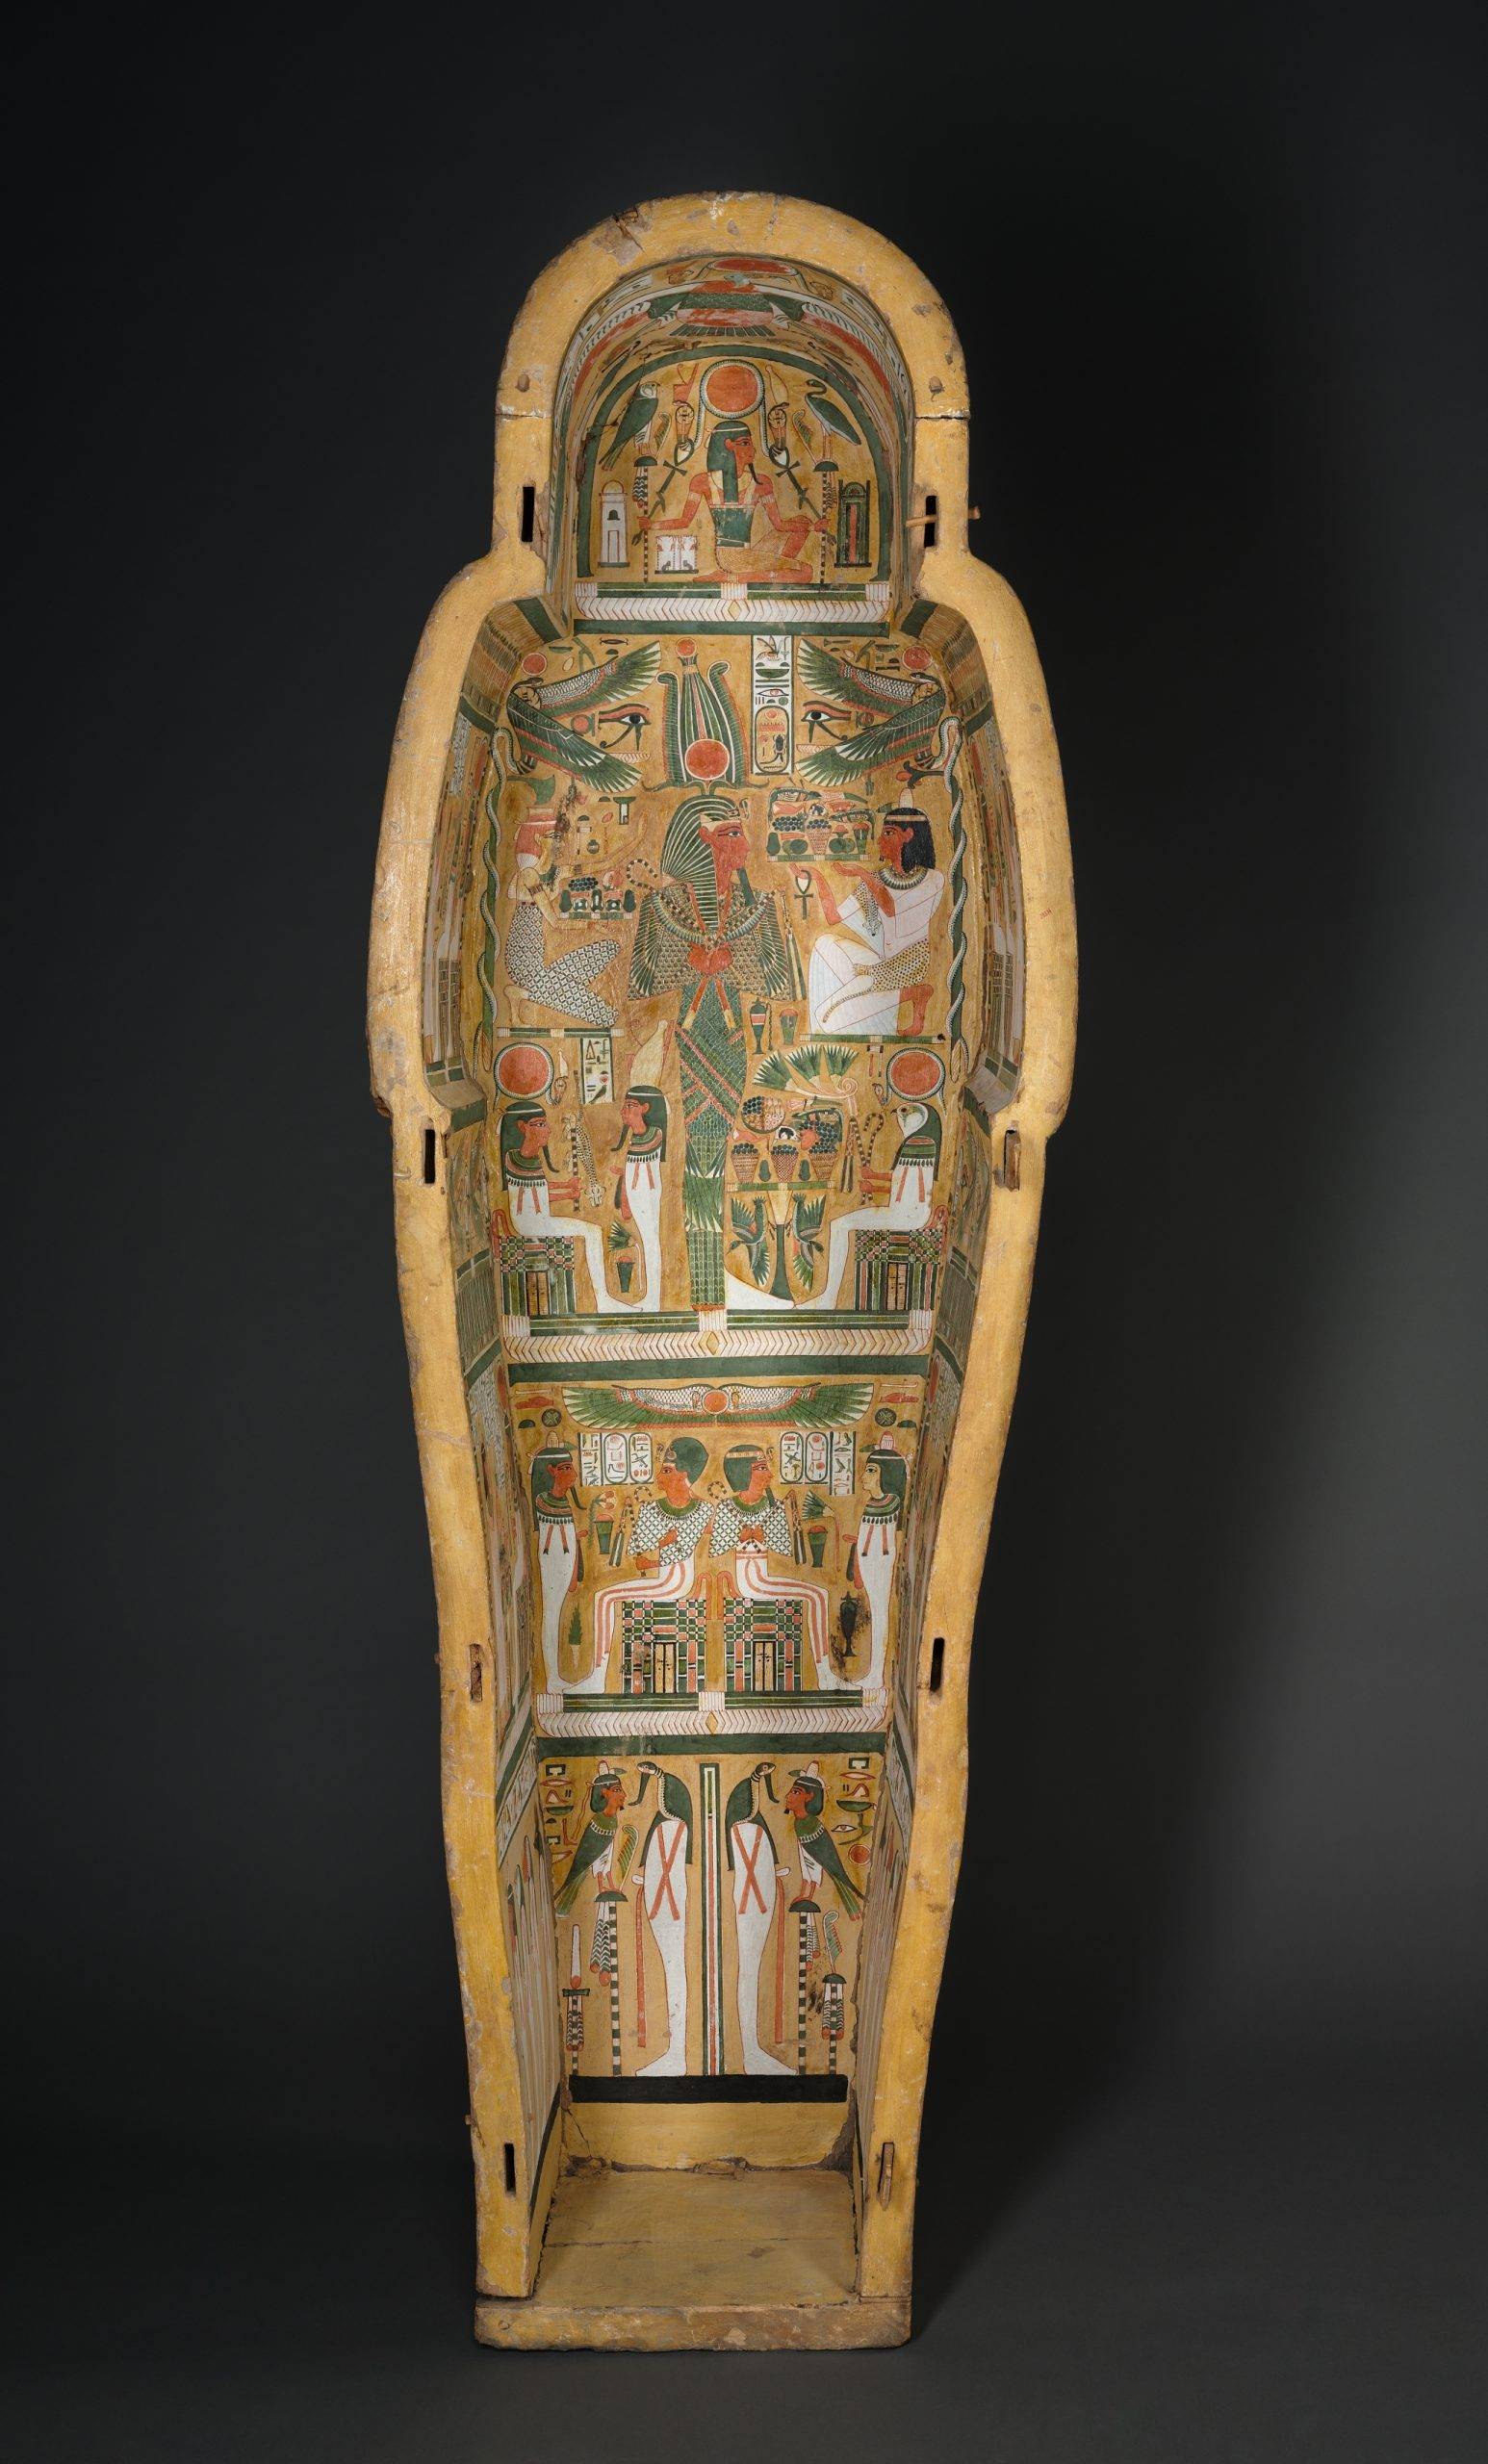 the coffin of bakenmut